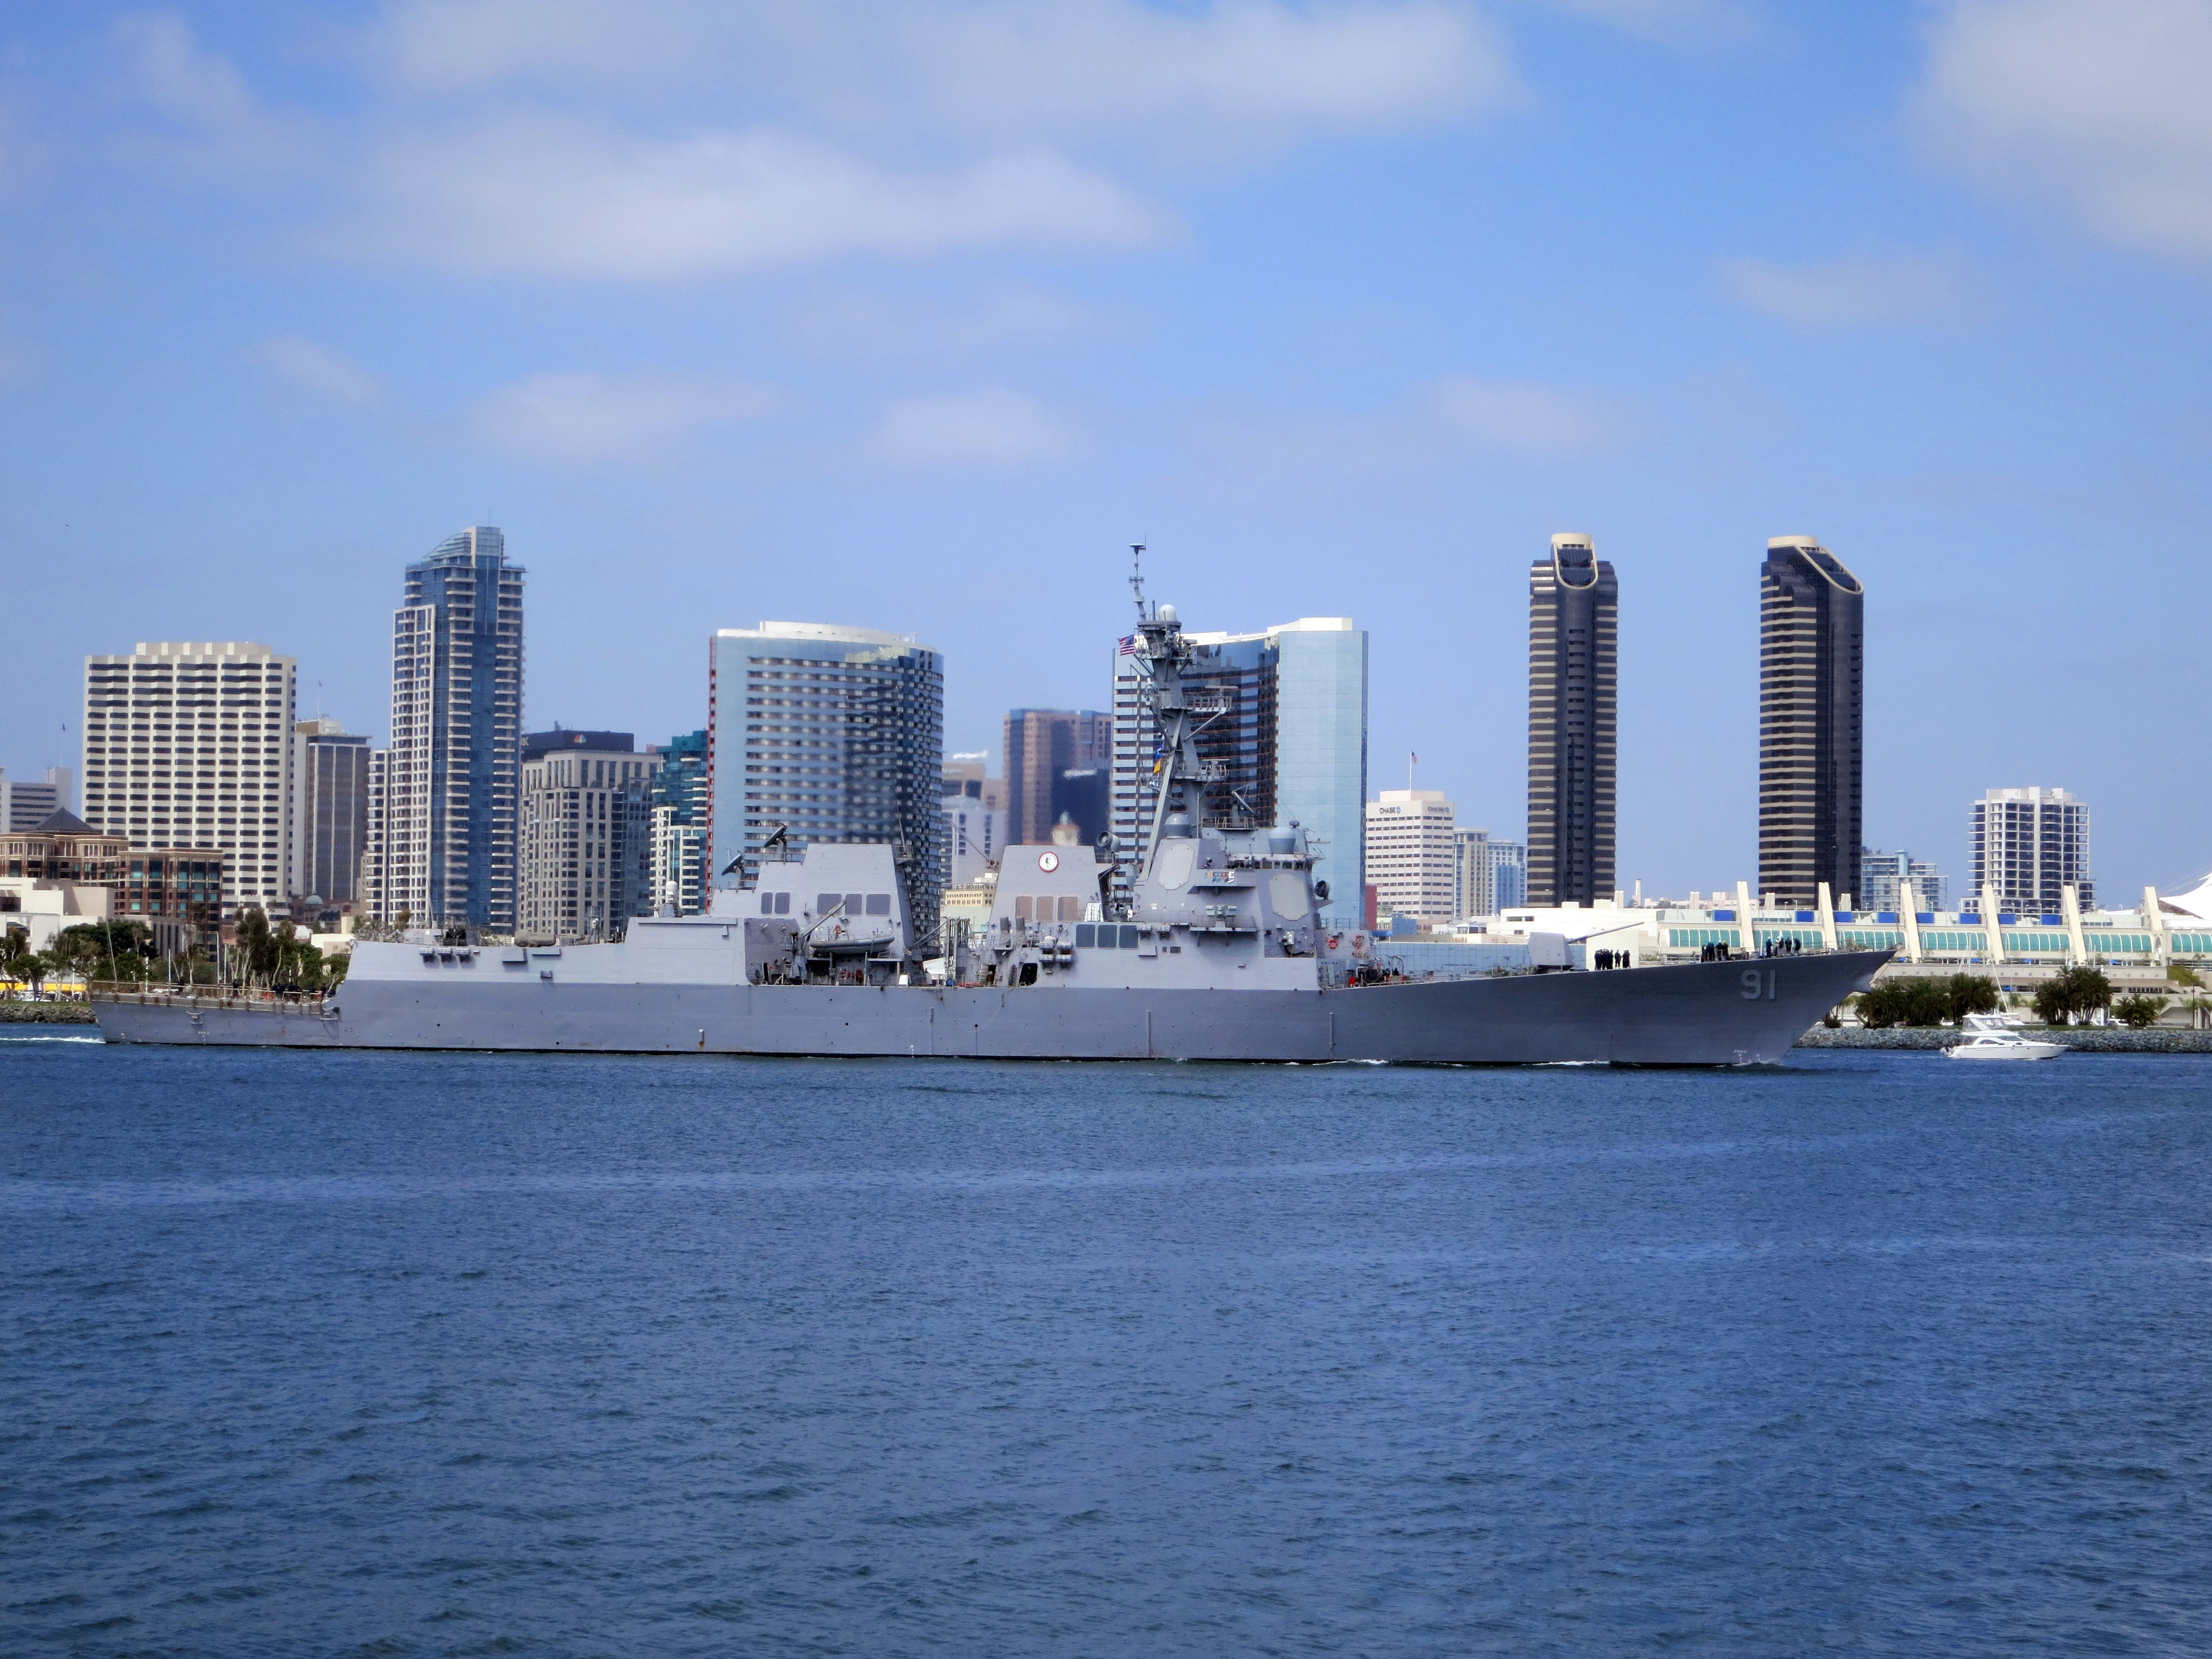 Free photo: San Diego Bay - Architecture, Bay, Building - Free Download ...